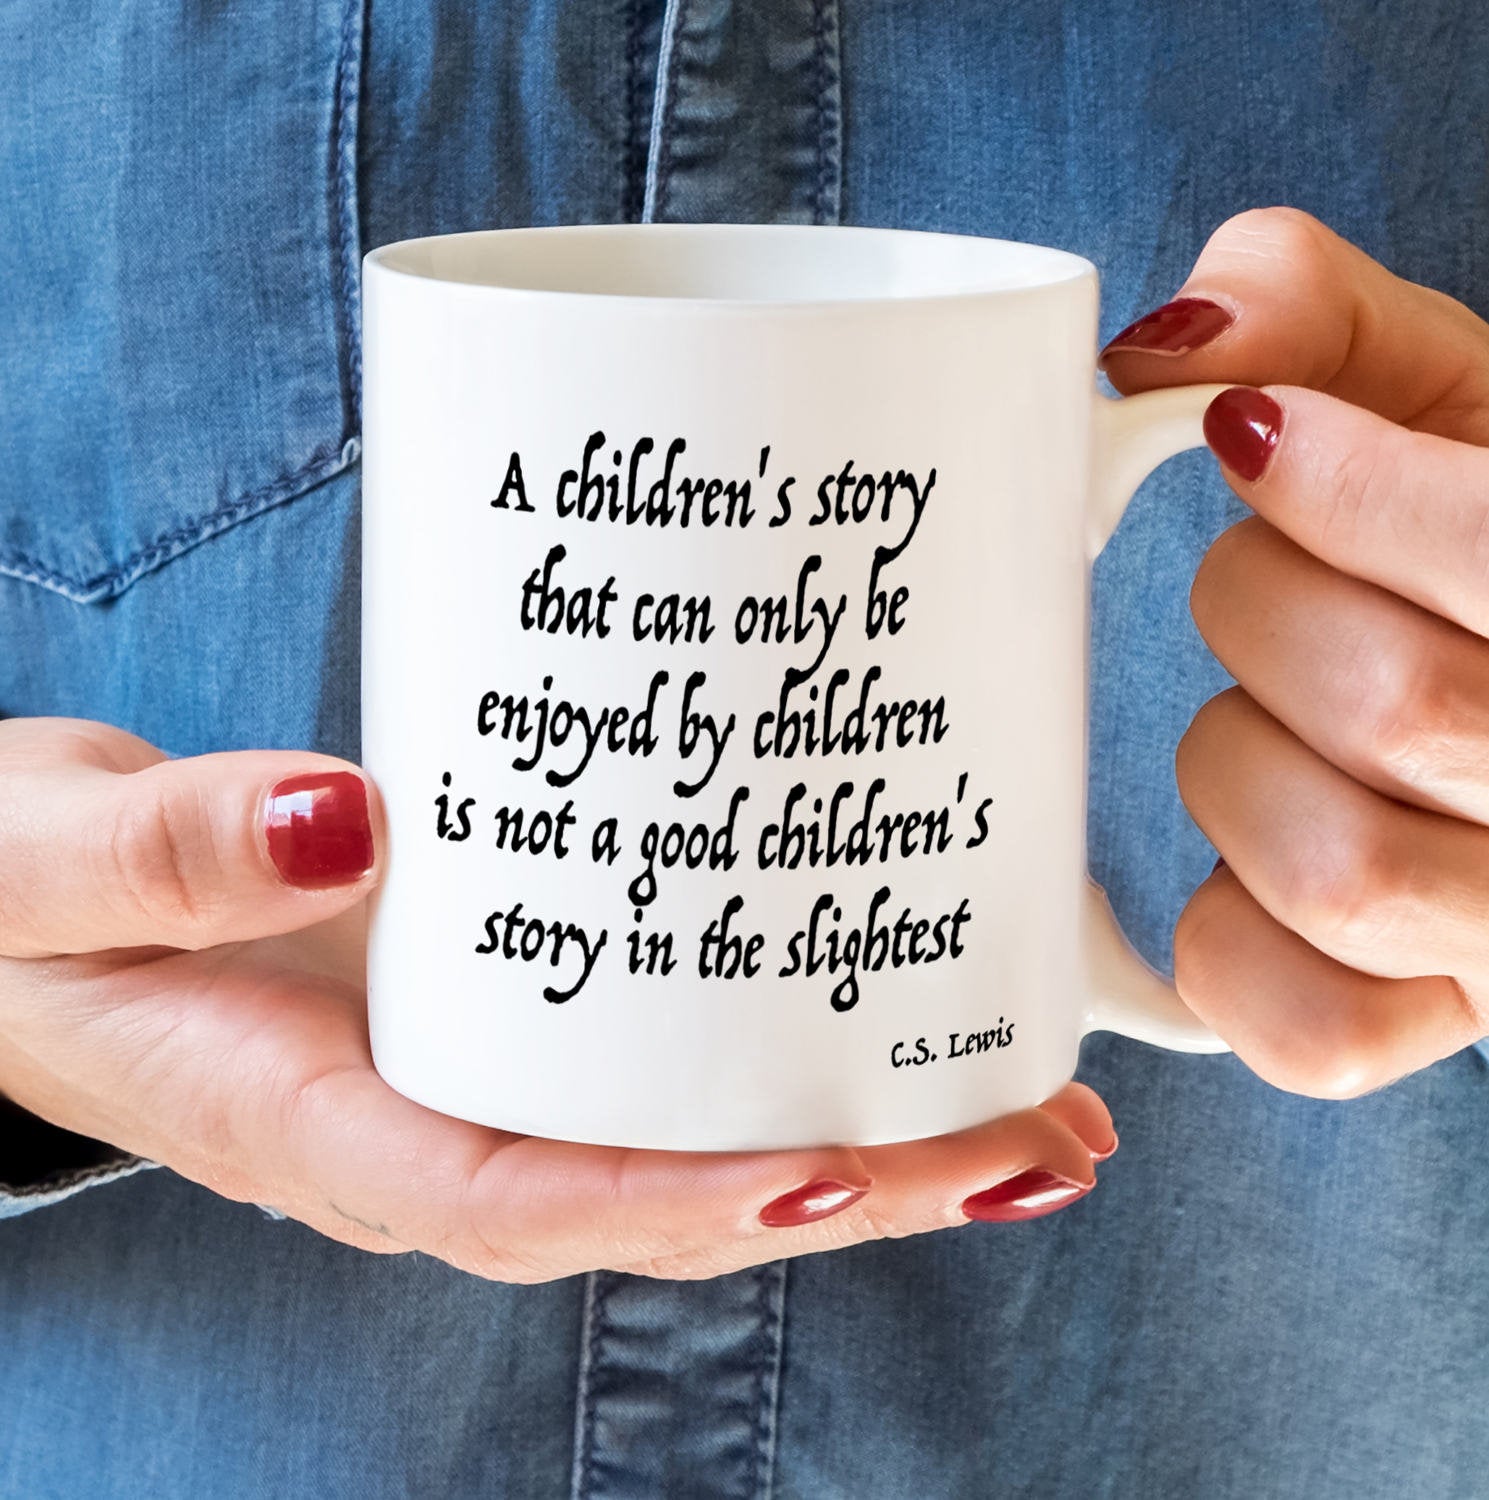 C S Lewis Book Quote Coffee Mug, A Children's Story